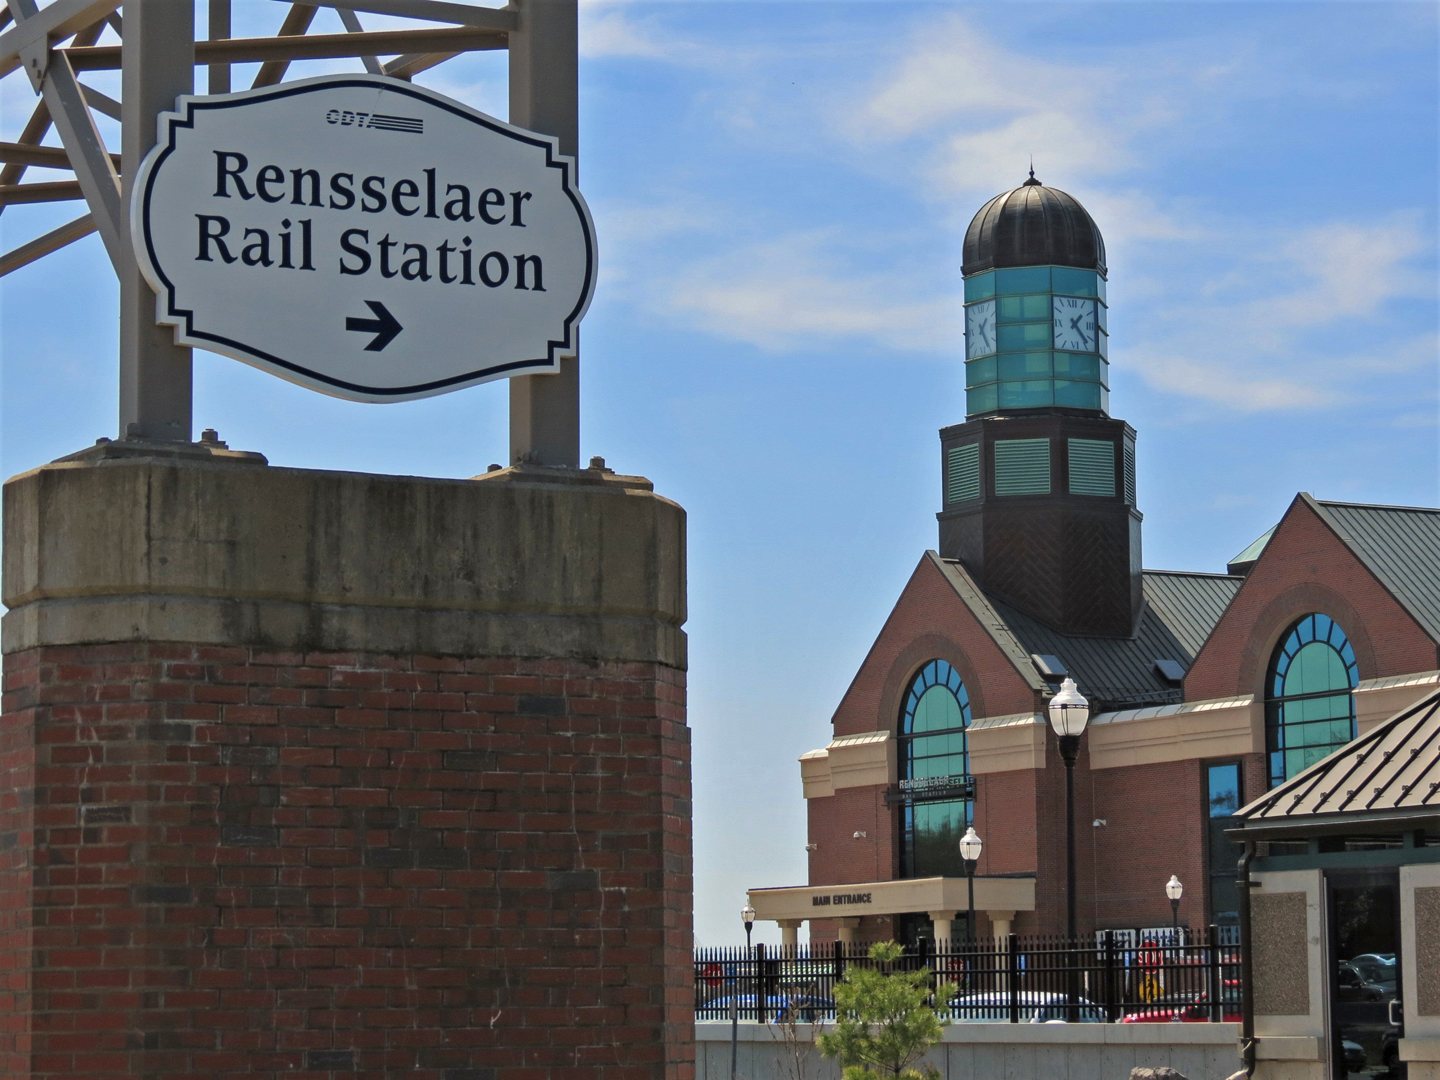 Rensselaer Rail Station Parking Garage will be CLOSED